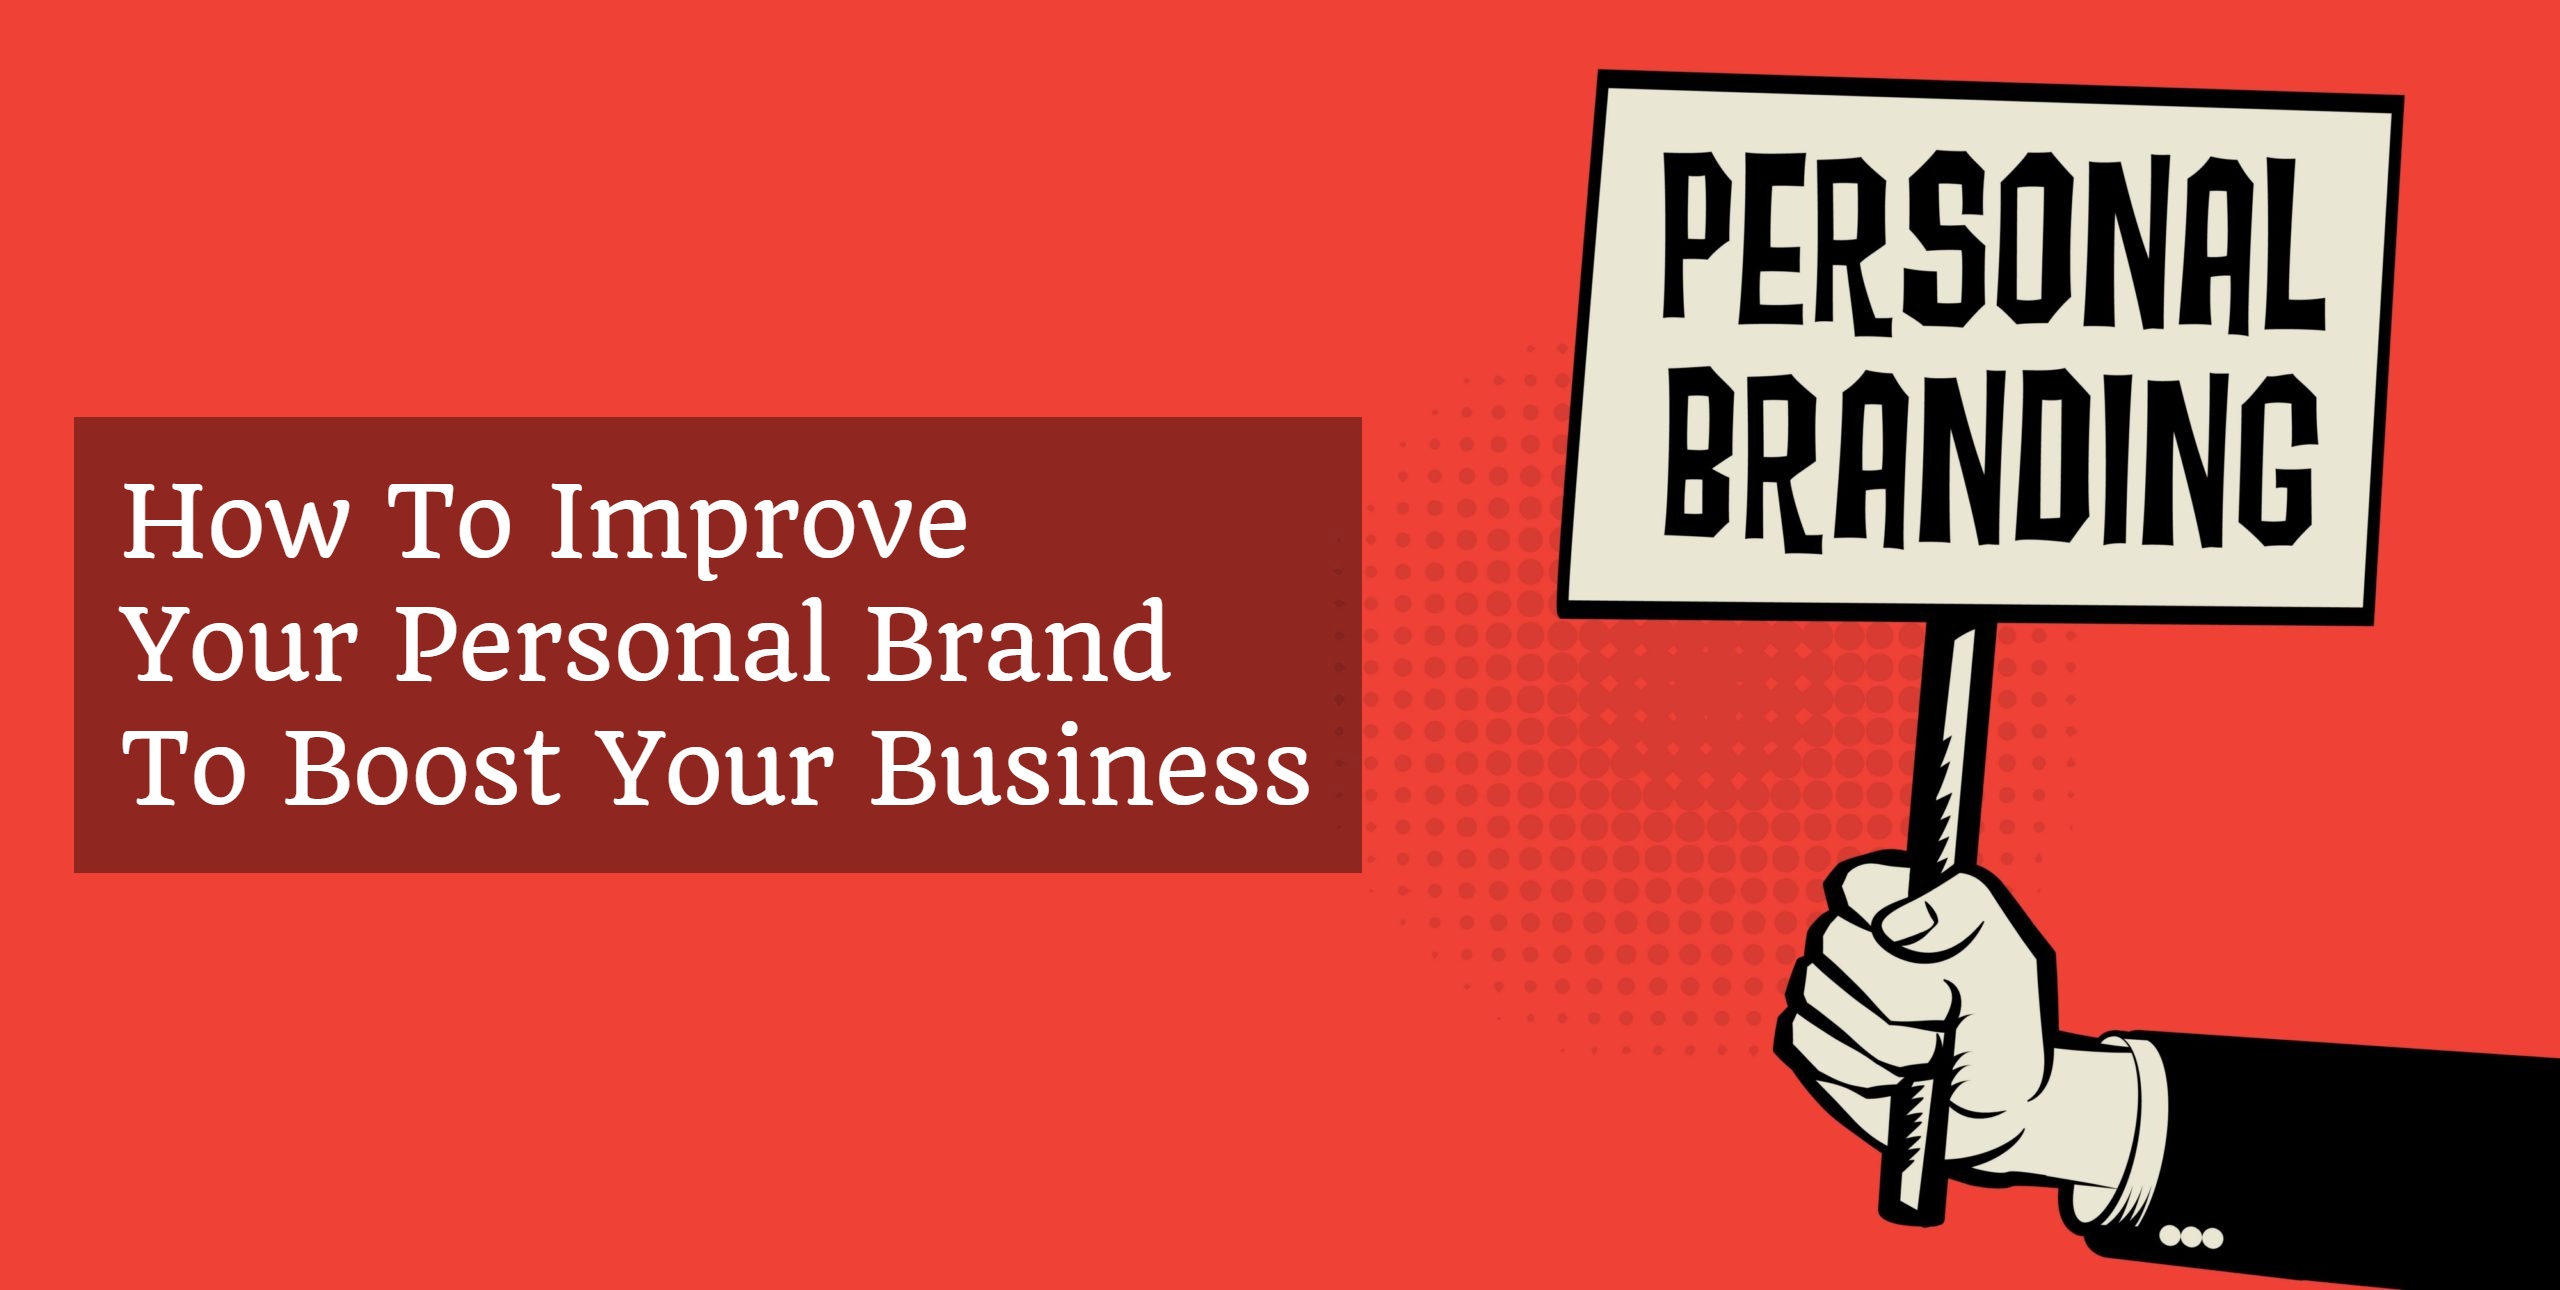 How To Improve Your Personal Brand To Boost Your Business